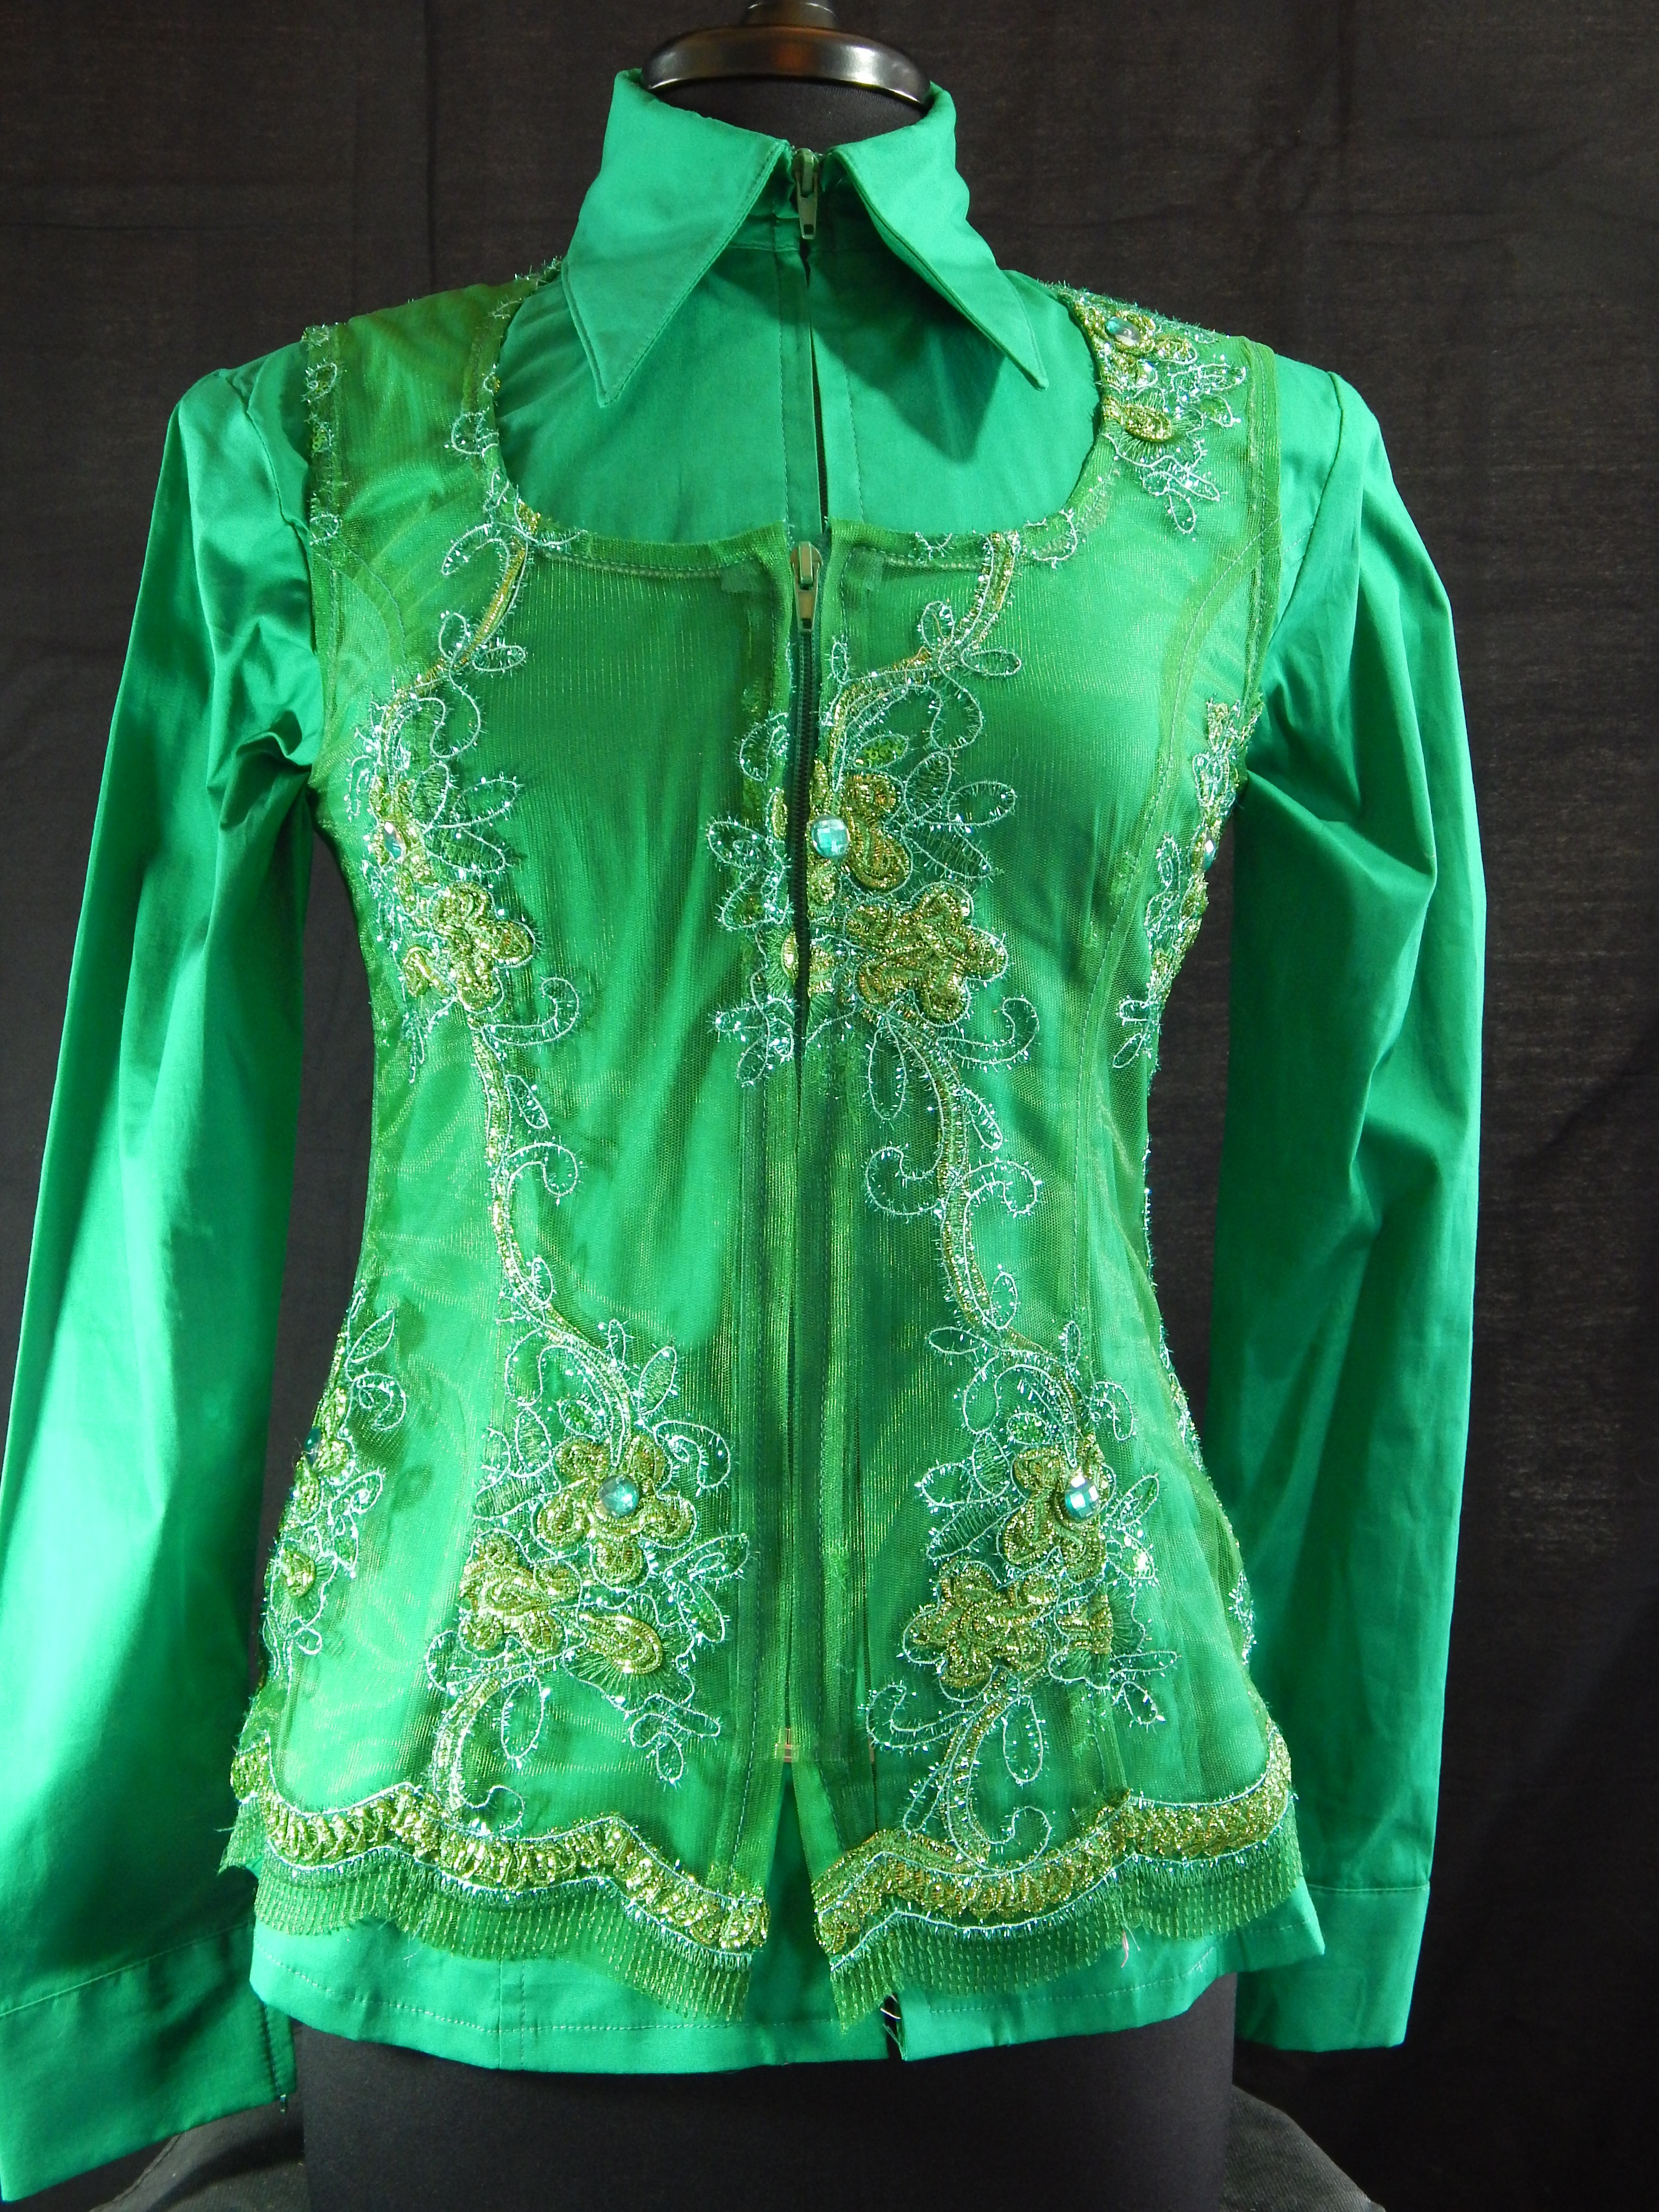 MKC Lace Horse Show Vest - Emerald base with Gold Floral